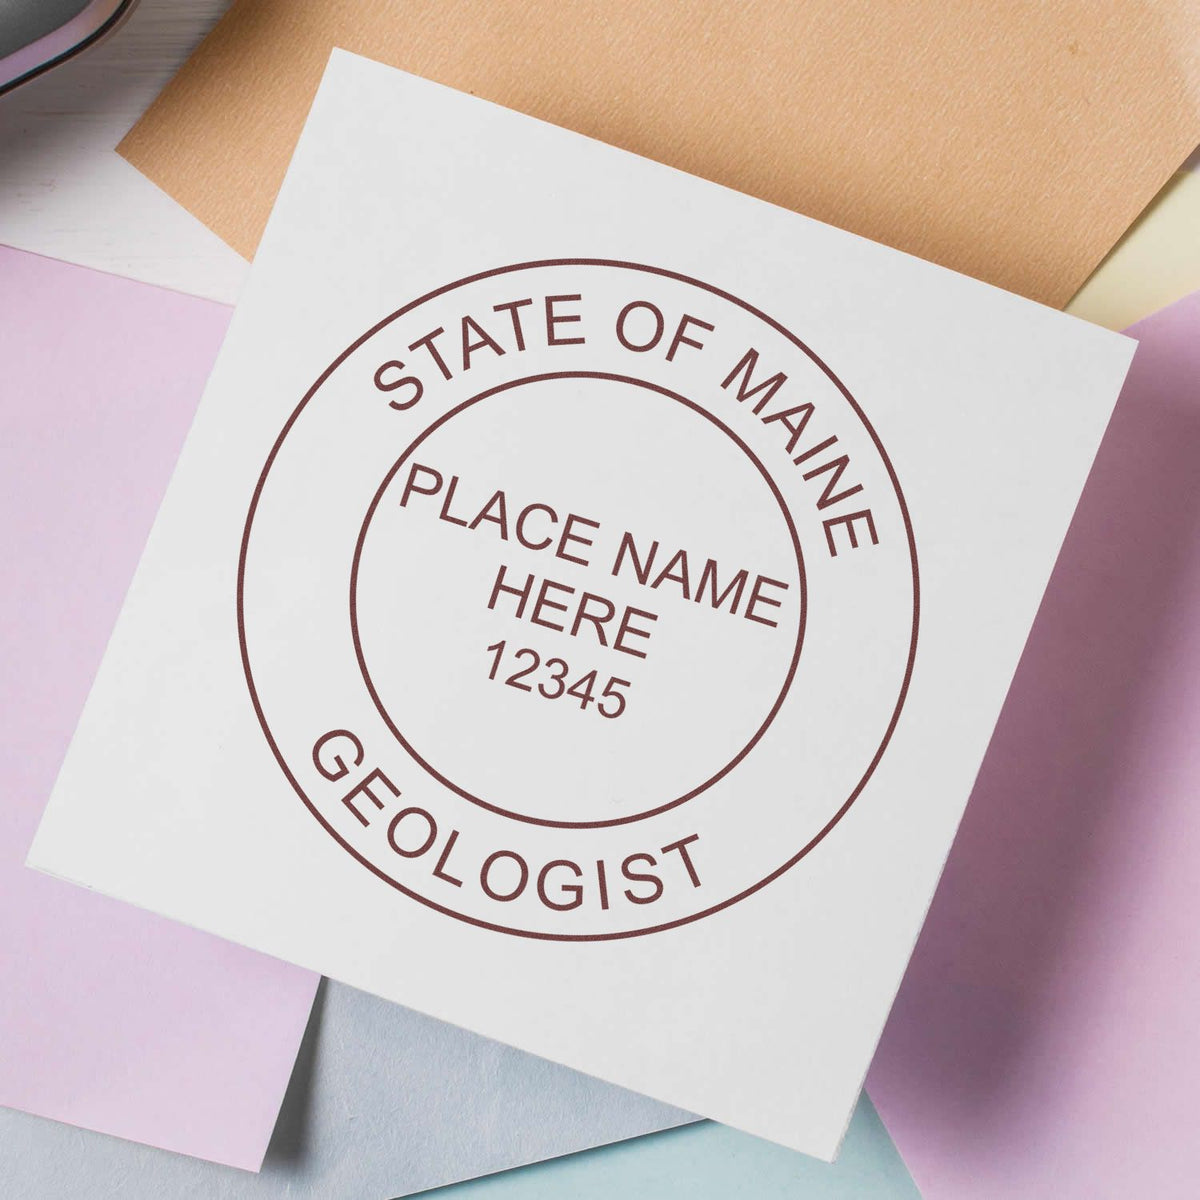 The Self-Inking Maine Geologist Stamp stamp impression comes to life with a crisp, detailed image stamped on paper - showcasing true professional quality.